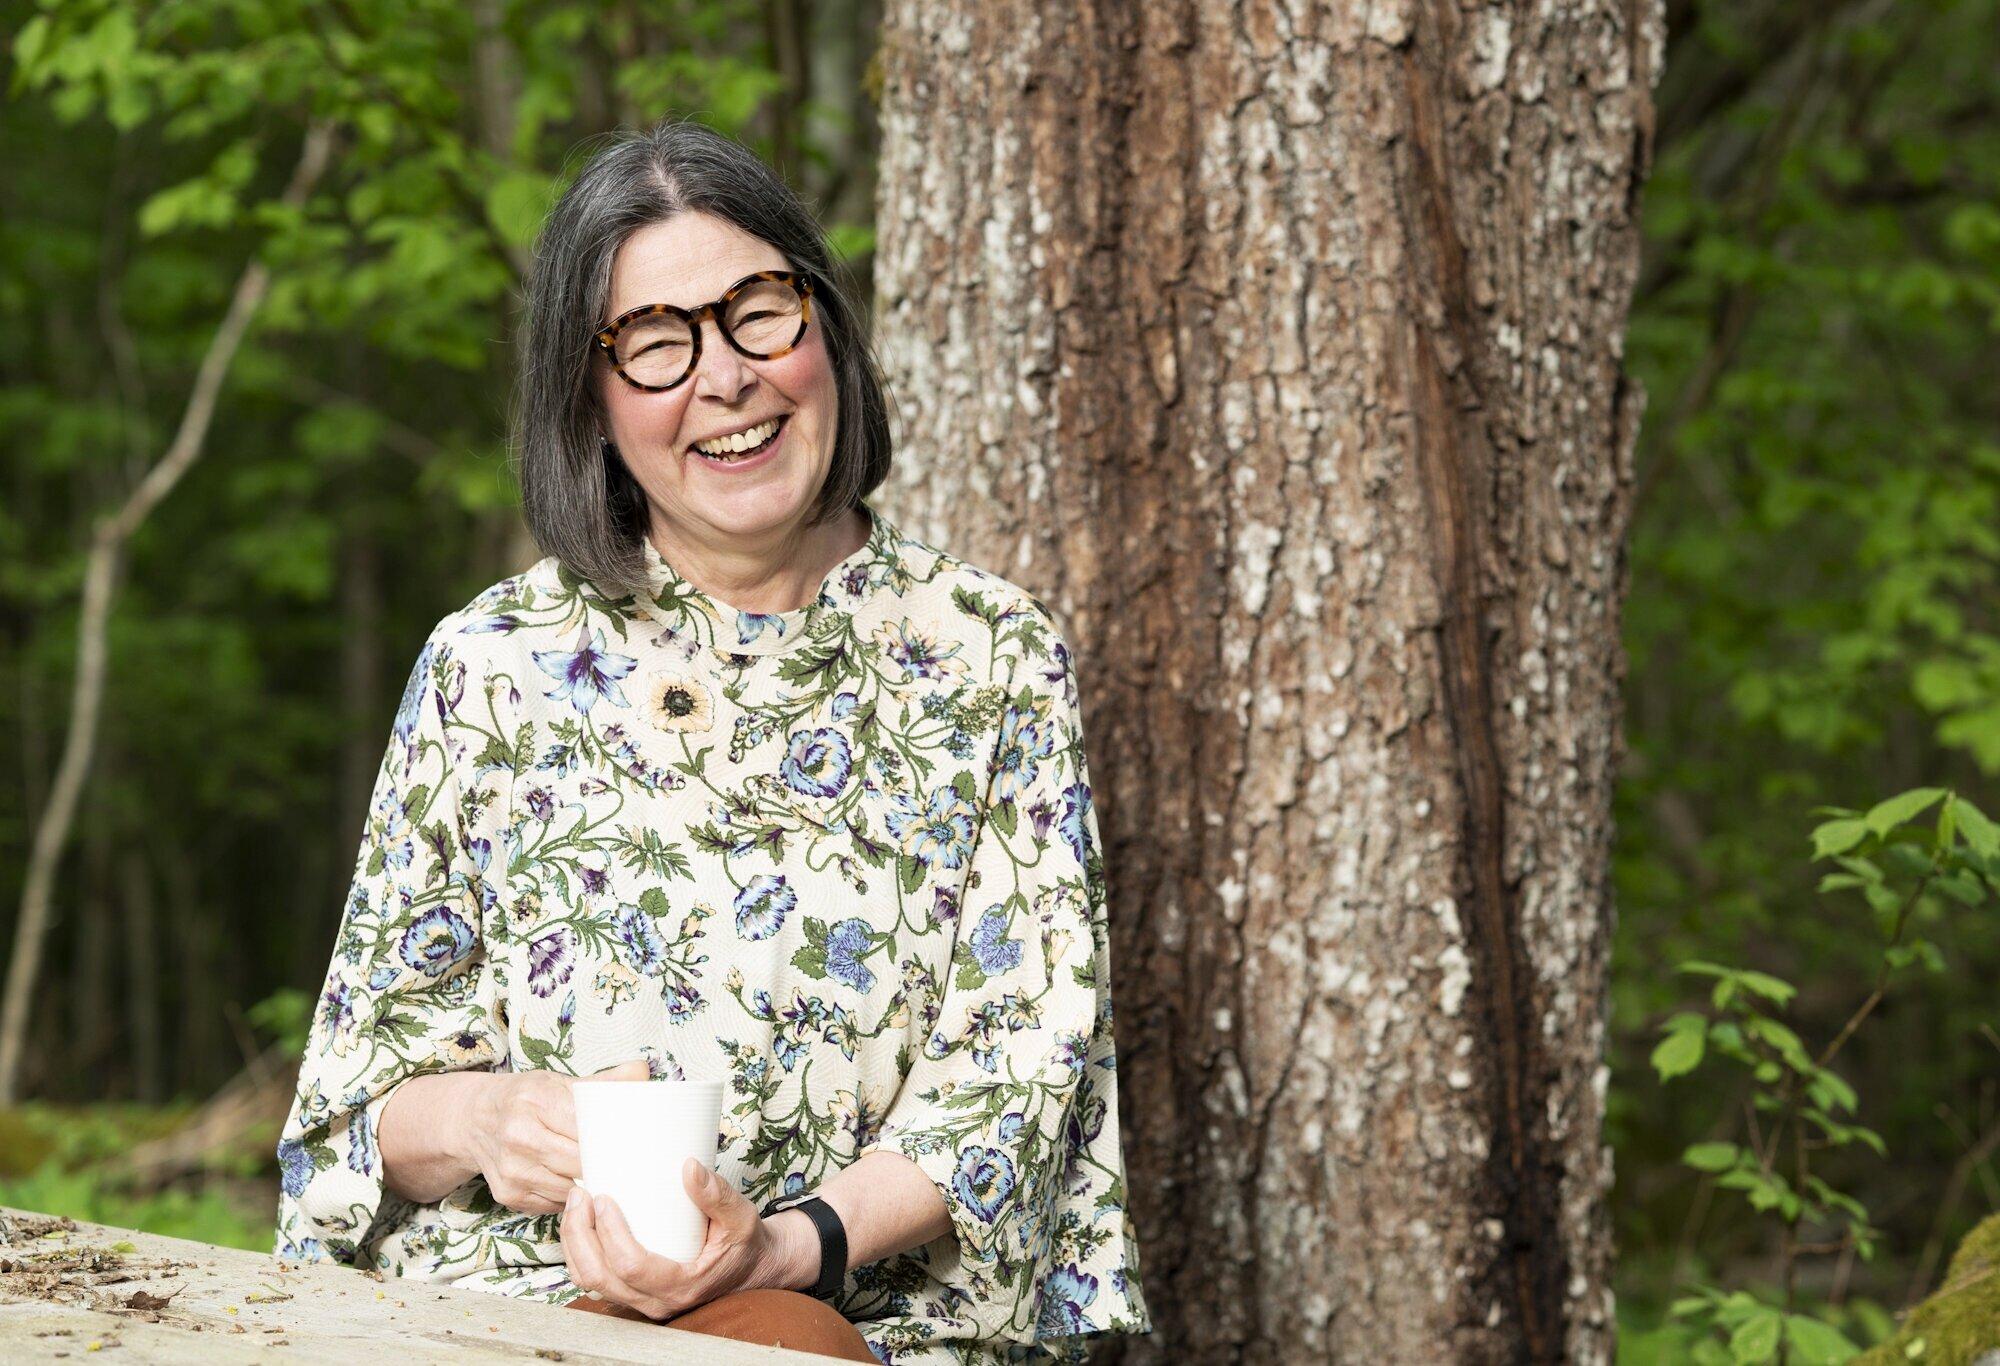 a white woman with shoulder length dark hair, wearing glasses and a floral shirt